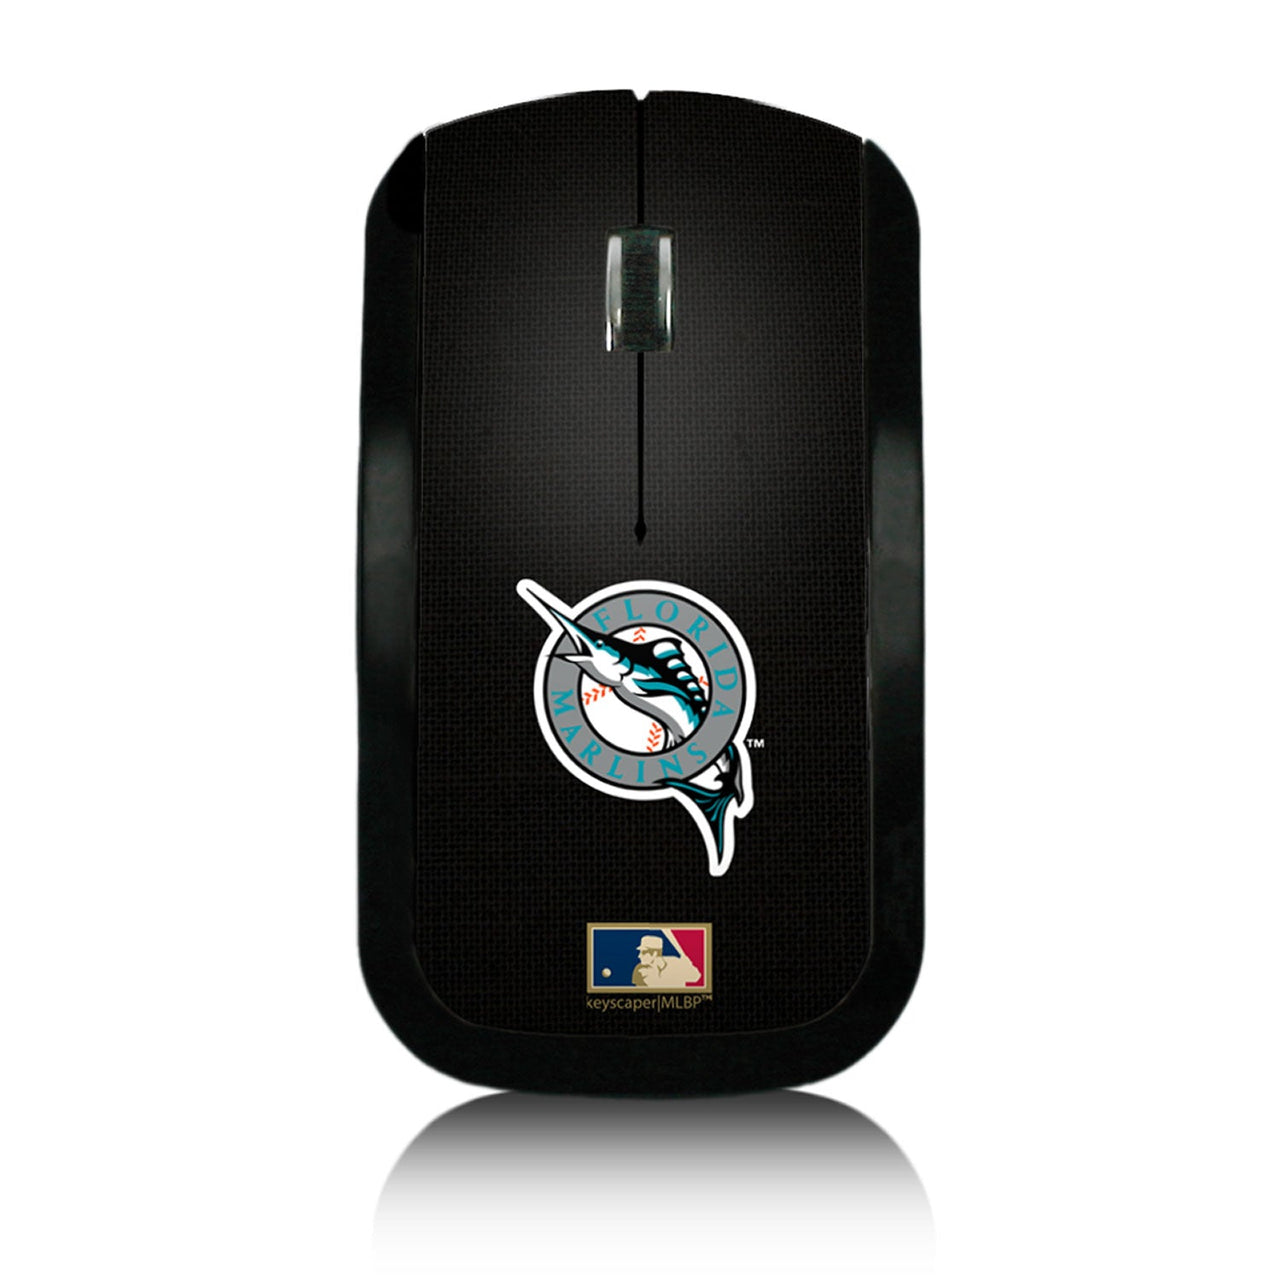 Miami Marlins 1993-2011 - Cooperstown Collection Solid Wireless USB Mouse-0